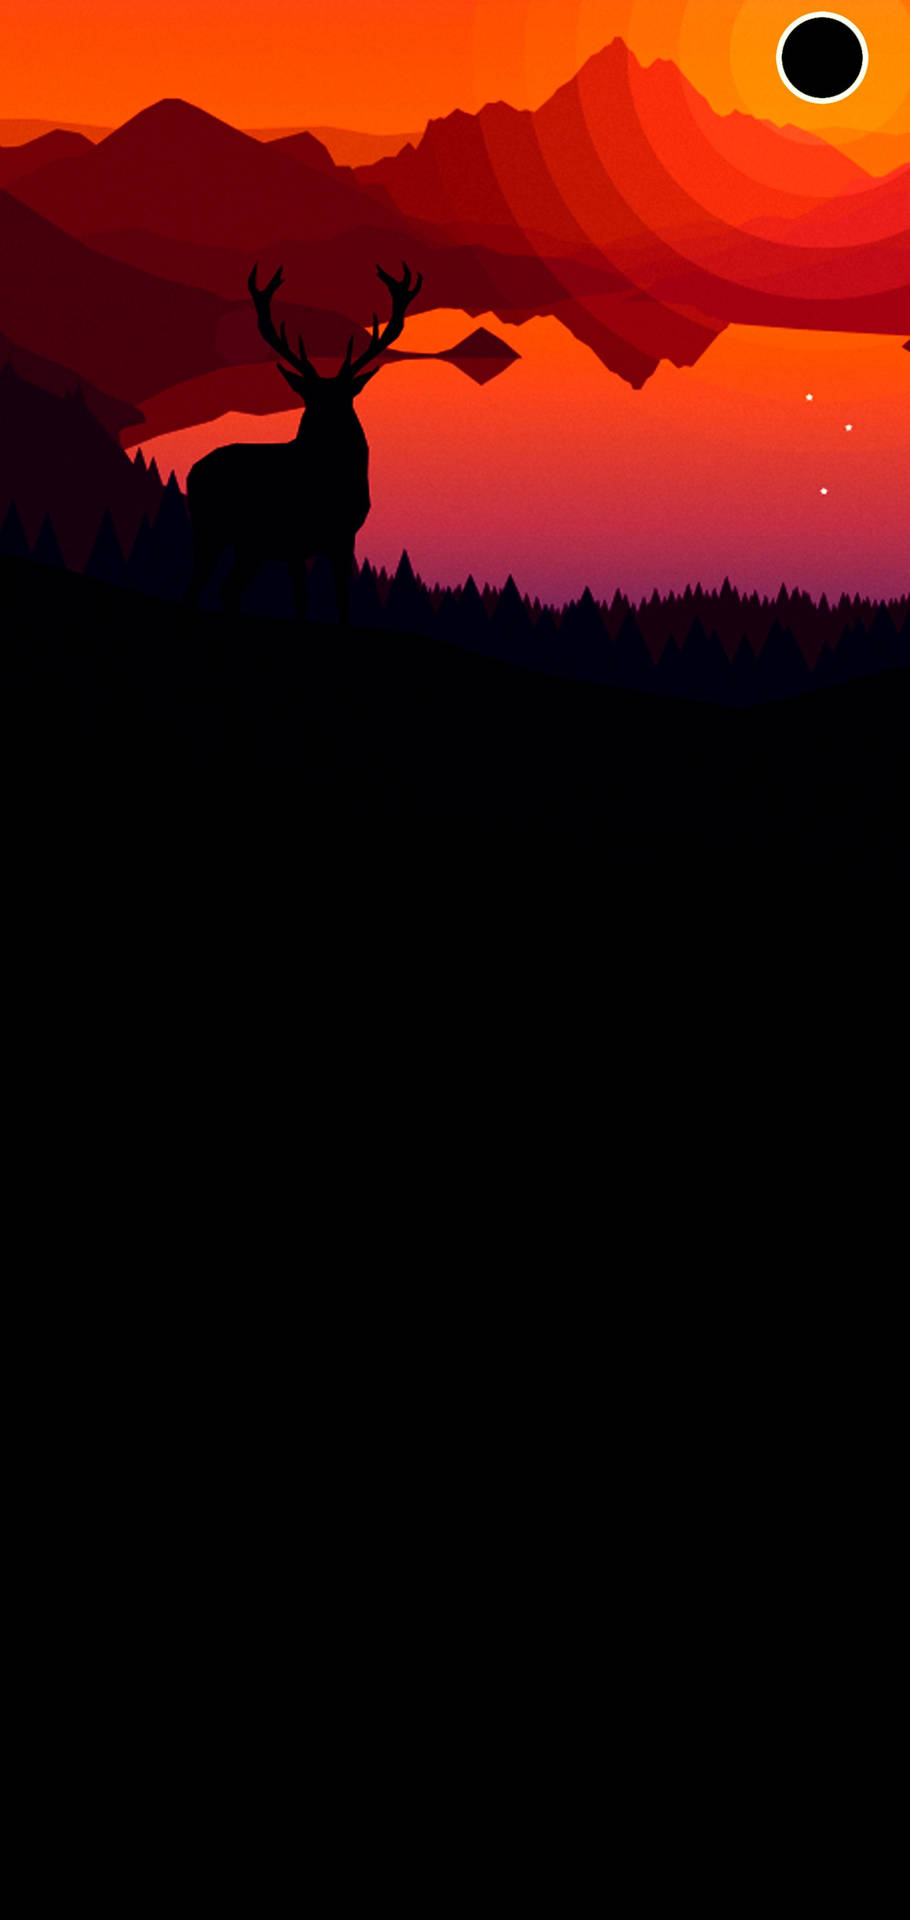 Silhouetted Reindeer Punch Hole 4K Wallpaper